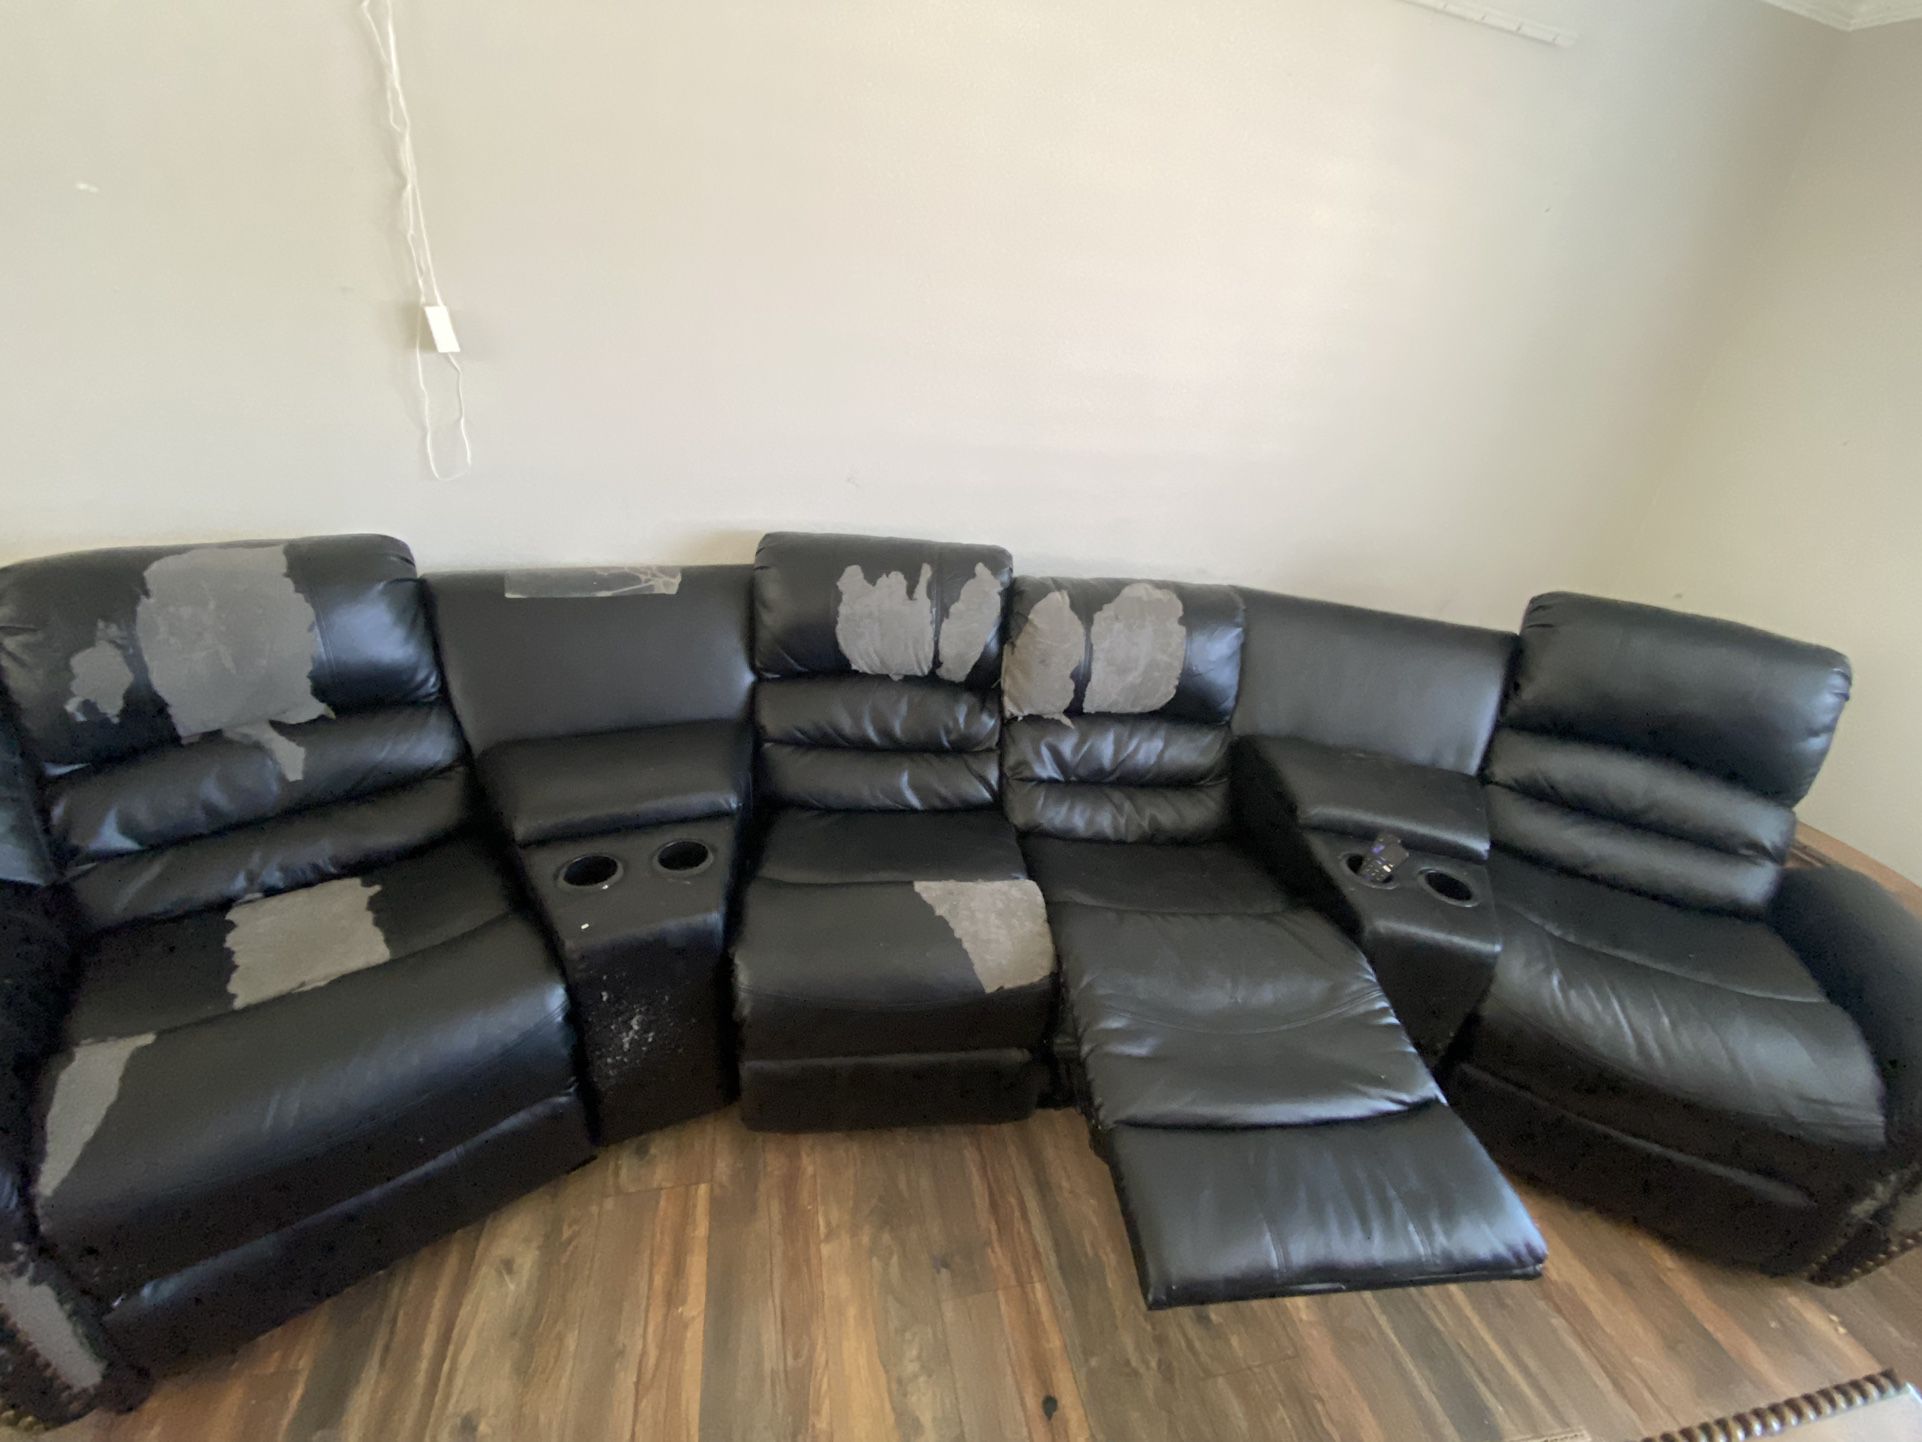 Free Reclining Couch 